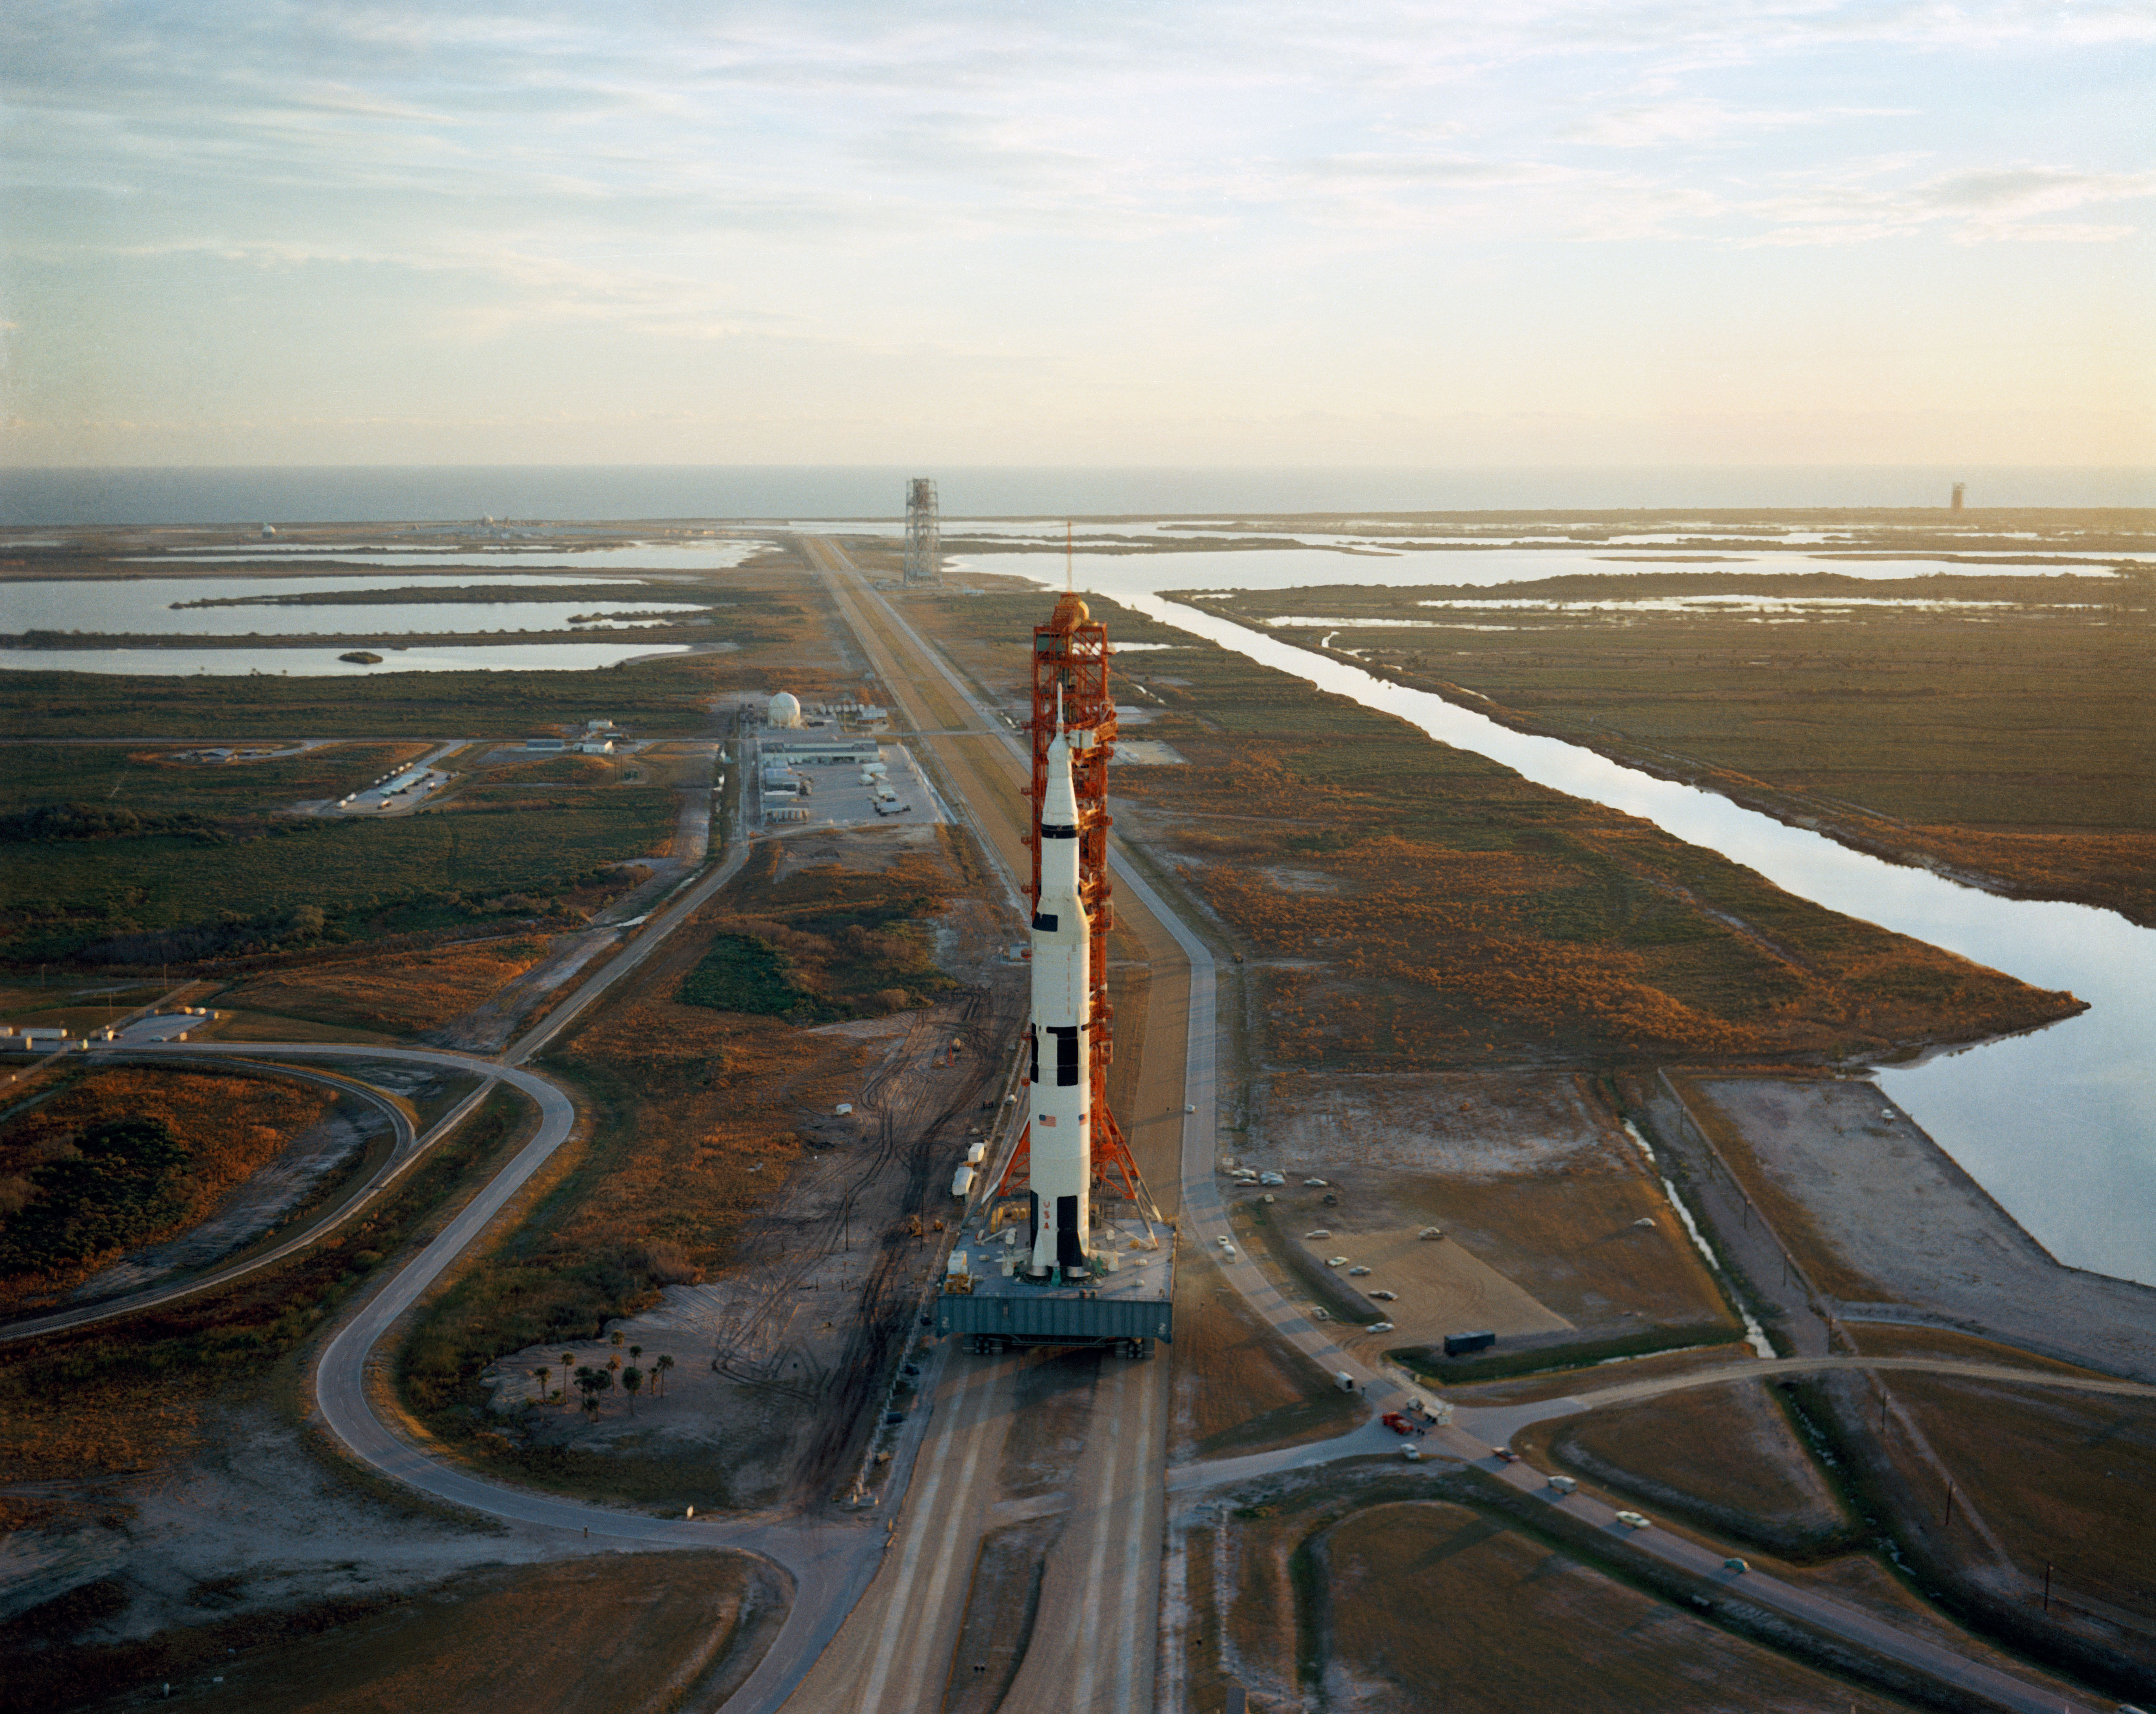 Apollo 9 rollout from the Vehicle Assembly Building to Launch Pad 39A at NASA’s Kennedy Space Center in Florida